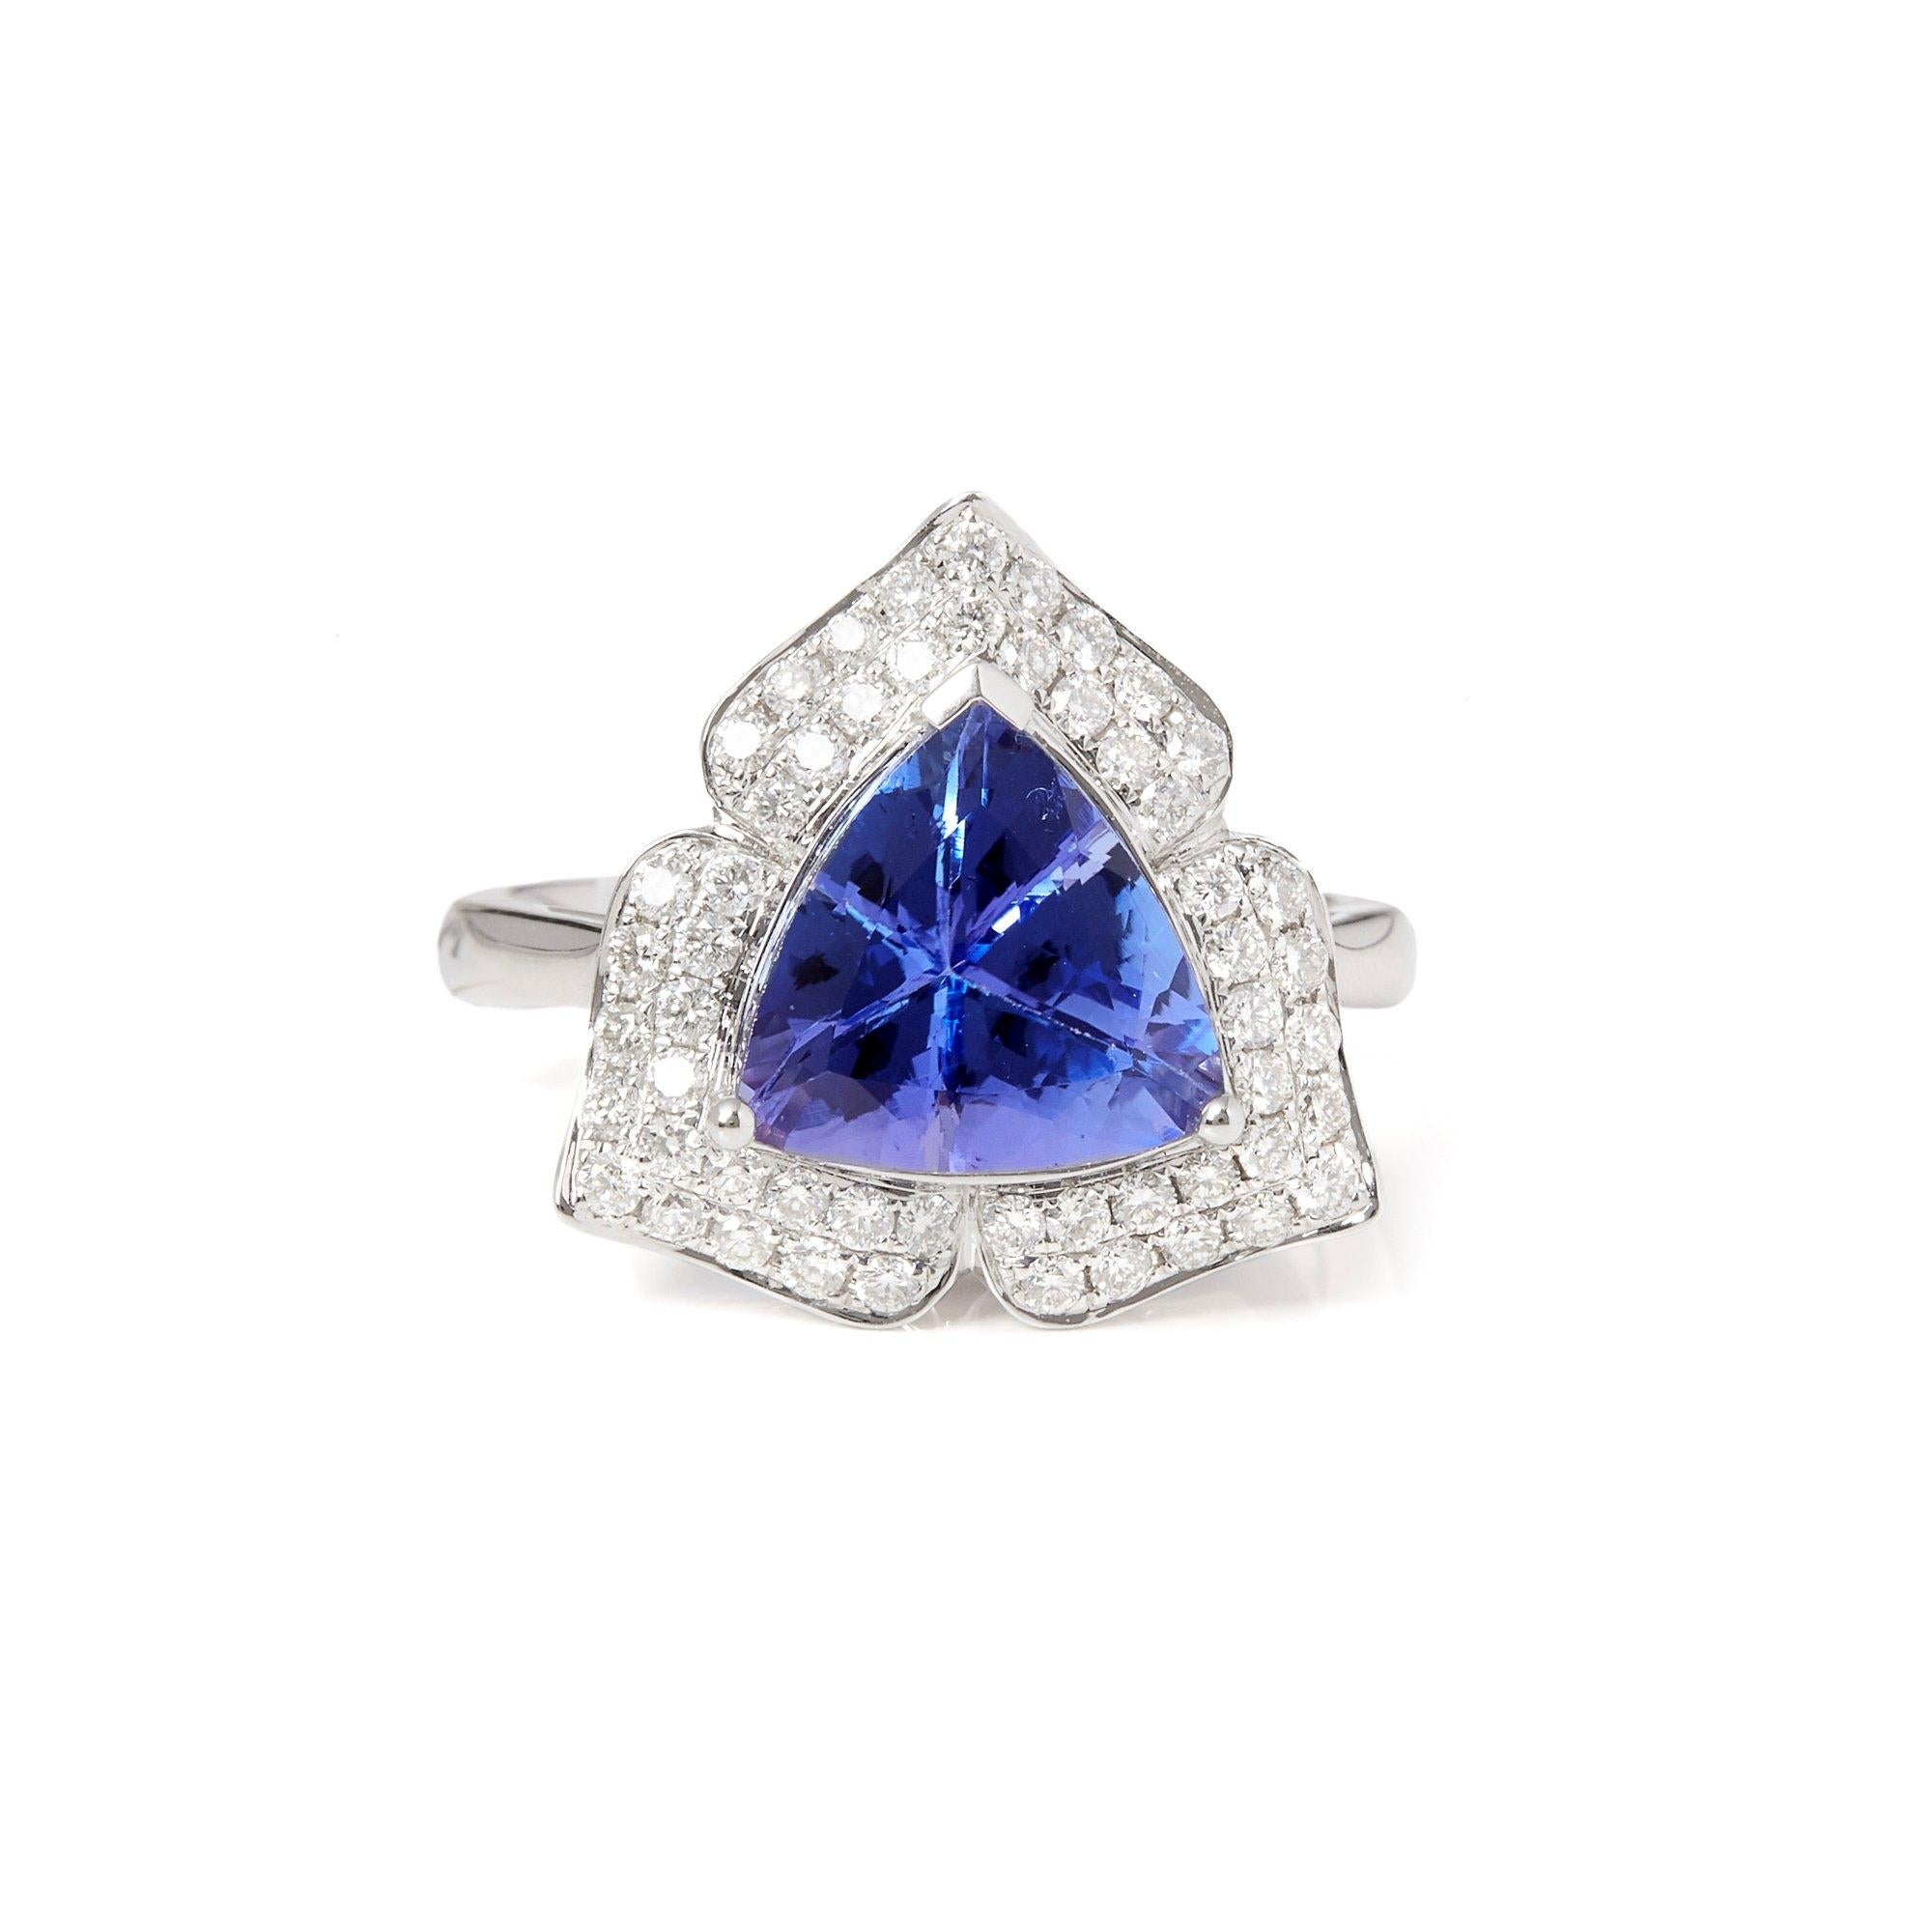 This ring designed by David Jerome is from his private collection and features one trilliant cut Tanzanite totalling 3.31cts sourced in the D block mine in Tanzania. Set with round brilliant cut Diamonds totalling 0.54cts mounted in an 18k white